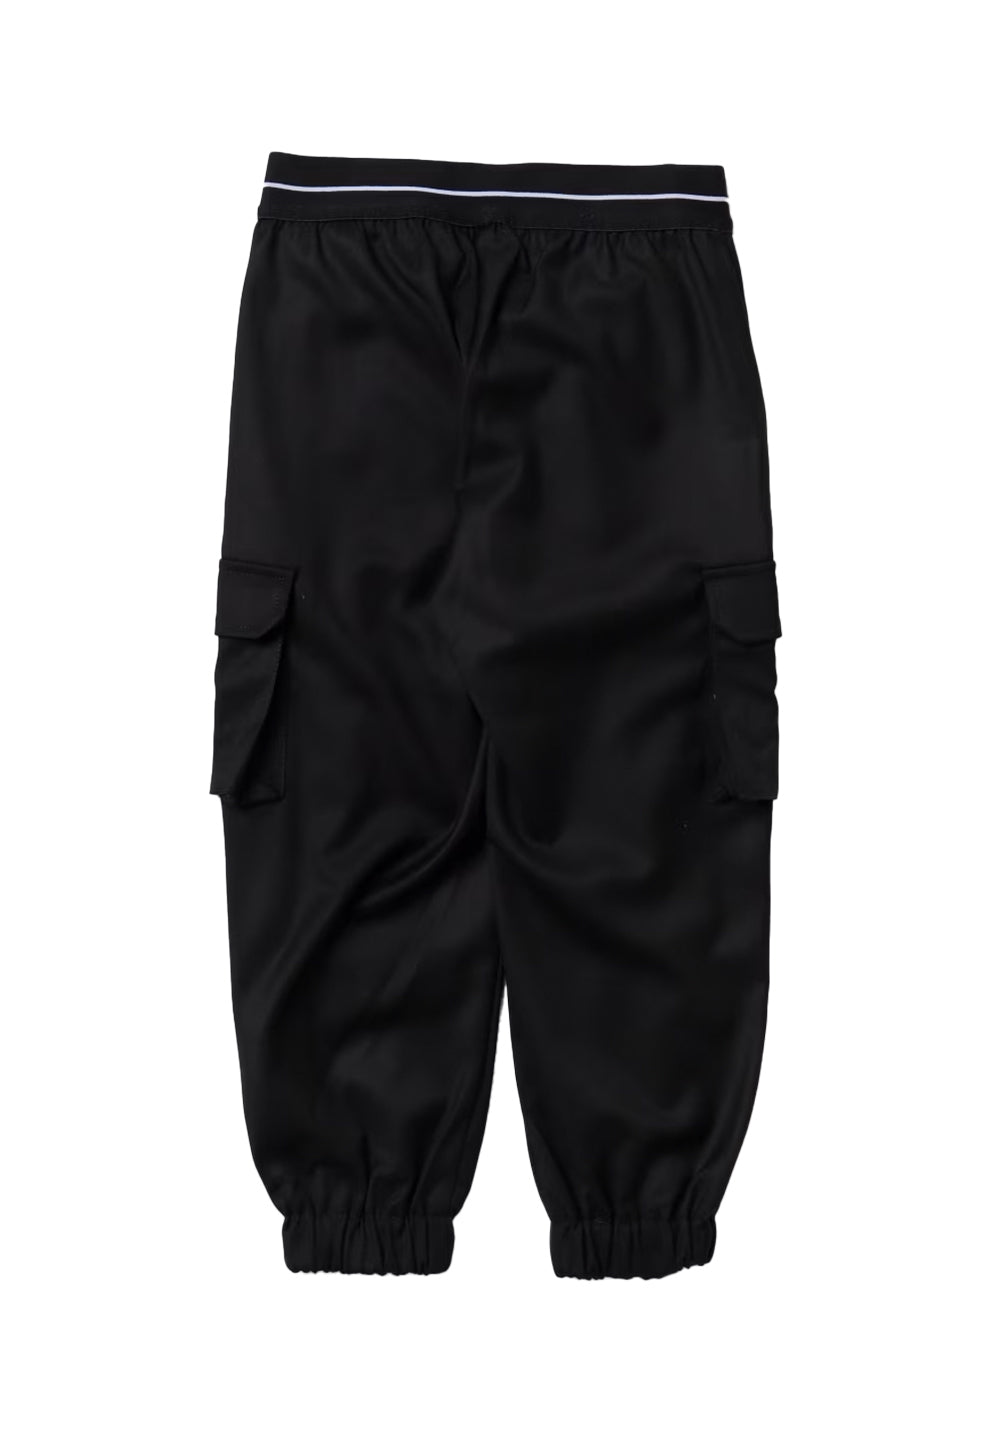 Black cargo trousers for girls